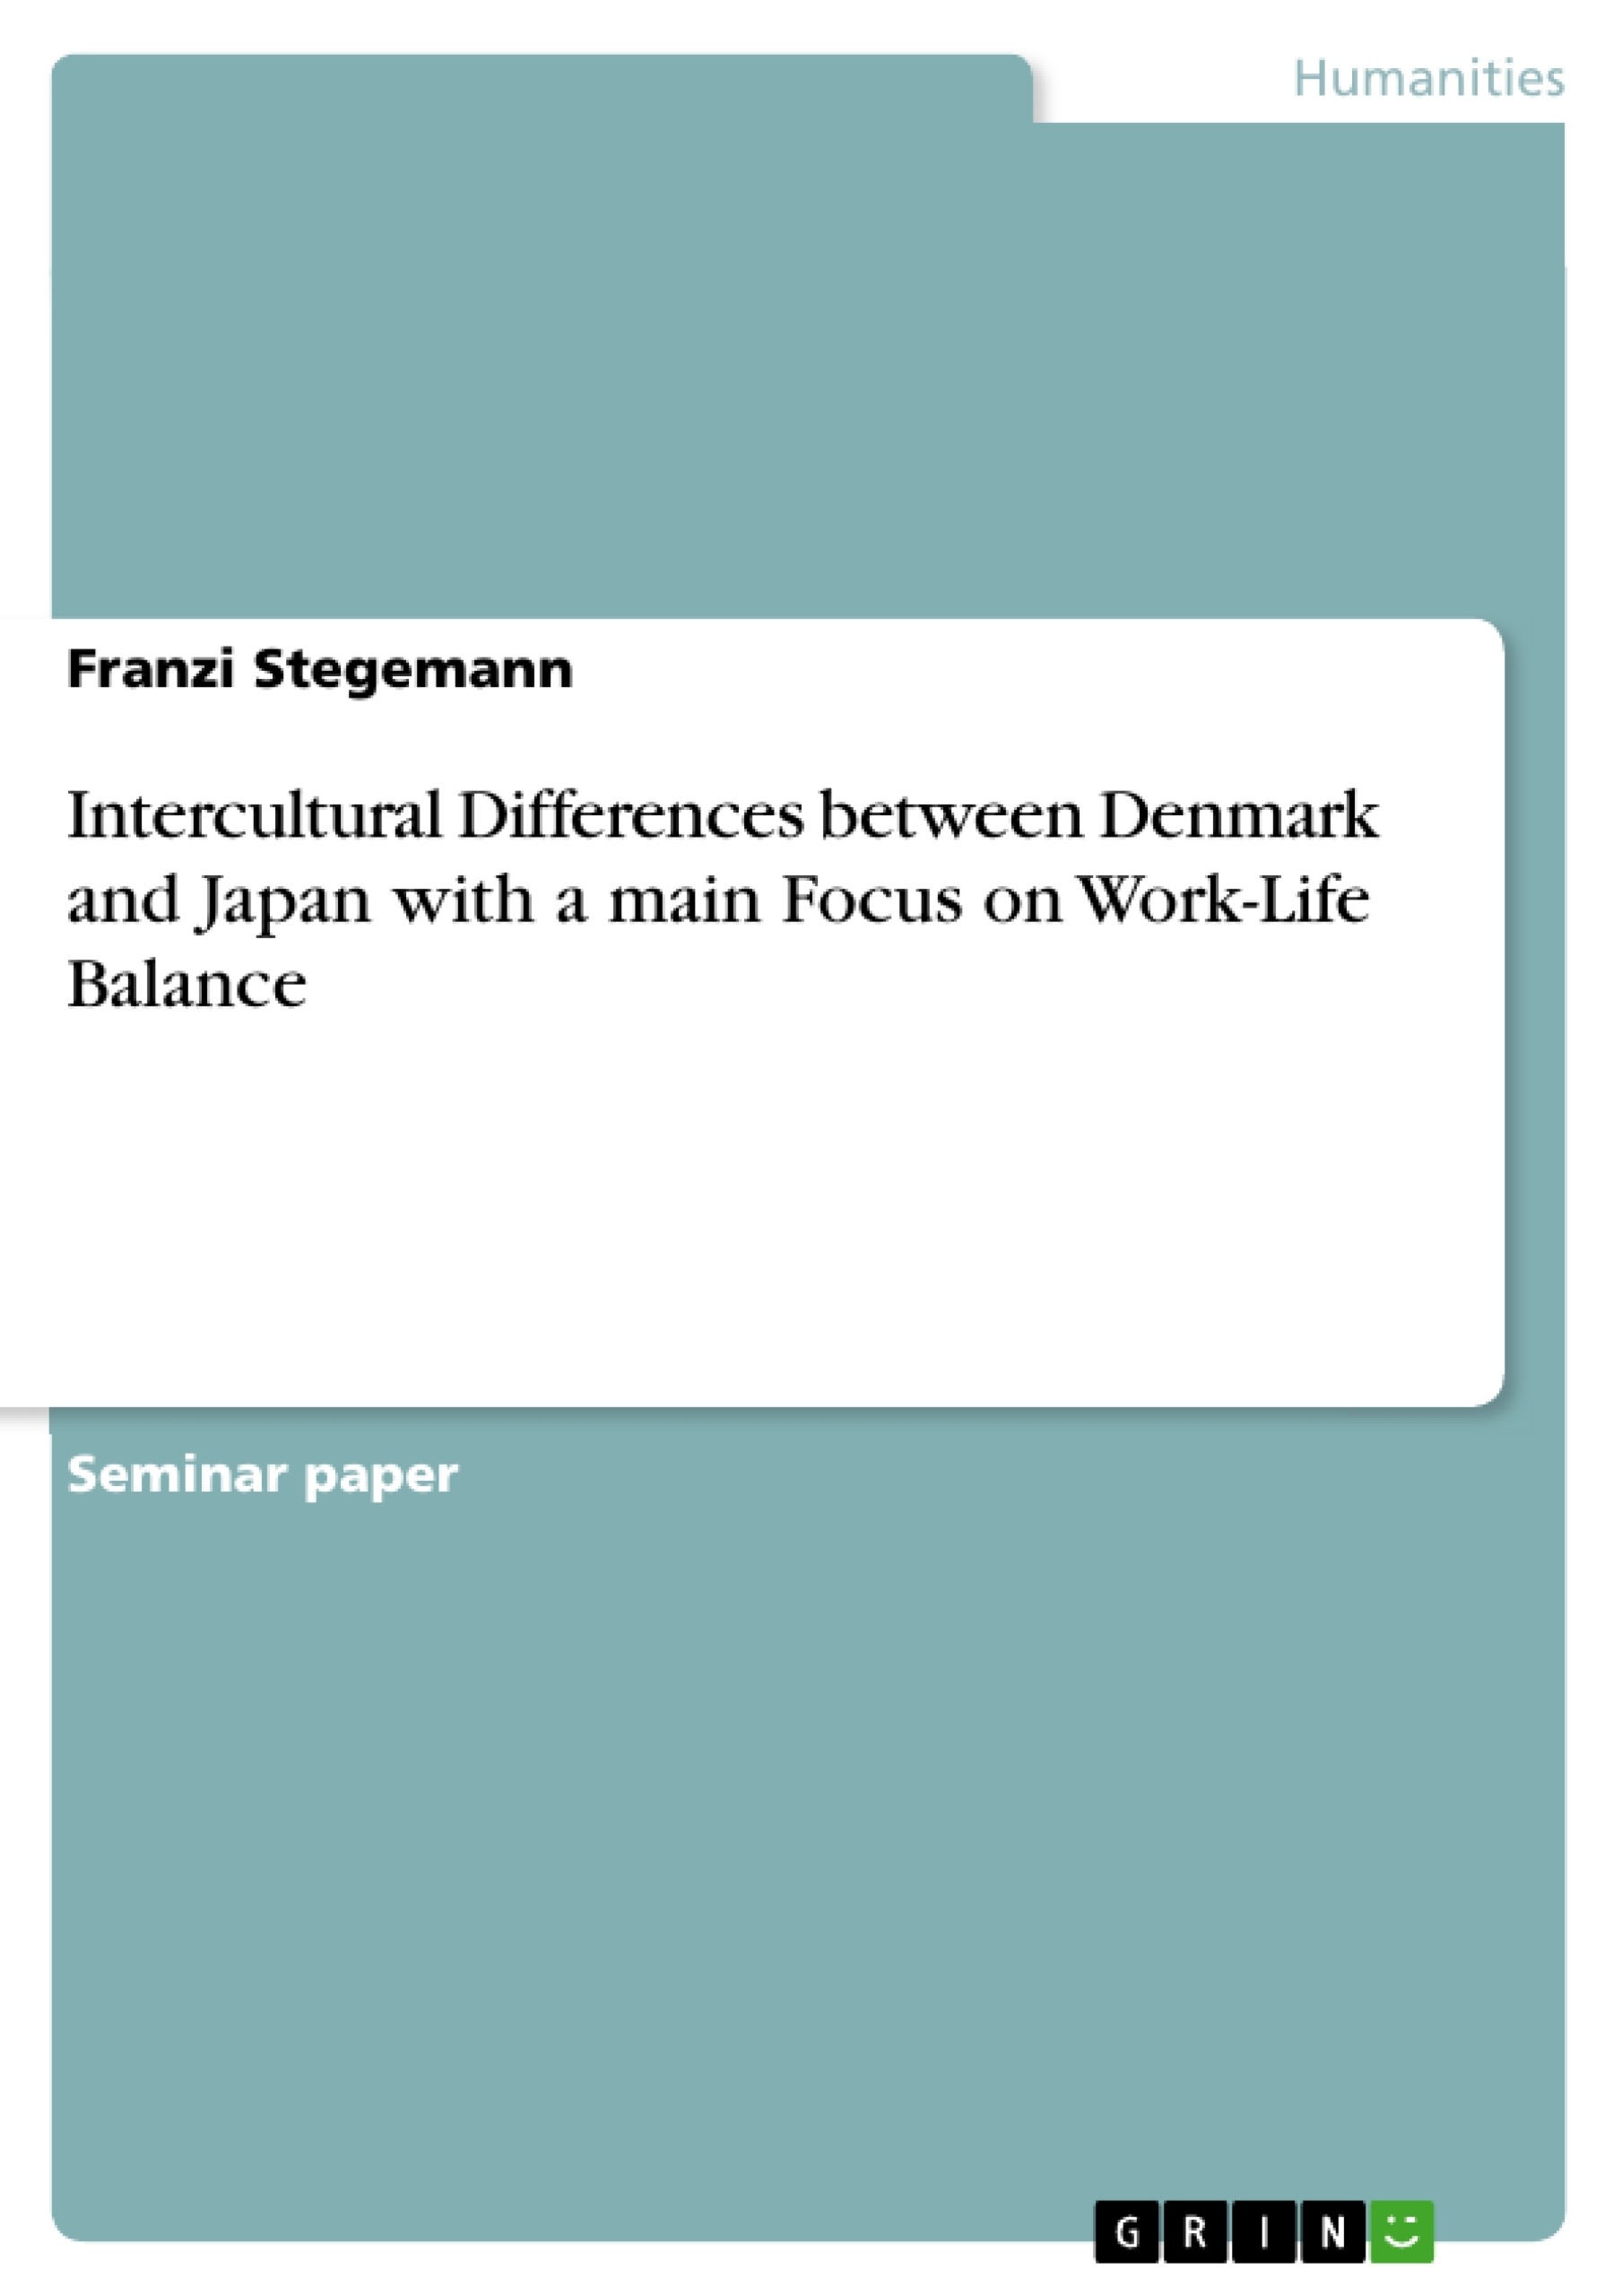 Titel: Intercultural Differences between Denmark and Japan with a main Focus on Work-Life Balance